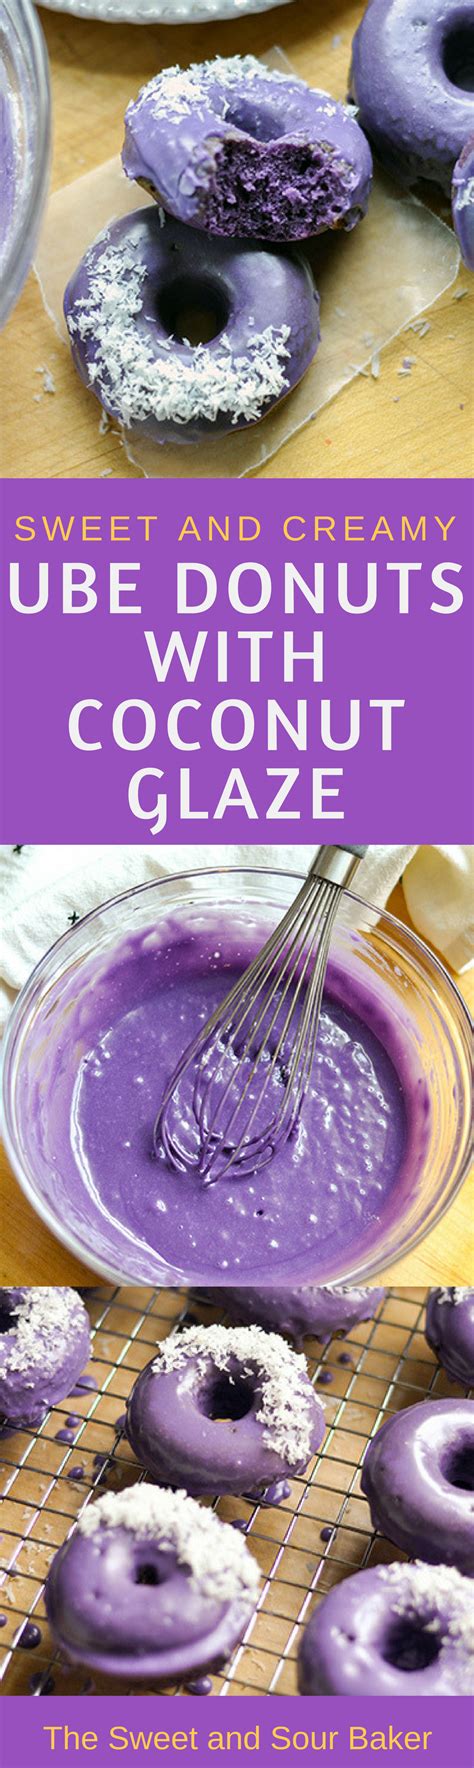 Ube Donuts with Coconut Glaze — The Sweet & Sour Baker | Desserts, Coconut flakes recipe, Ube ...